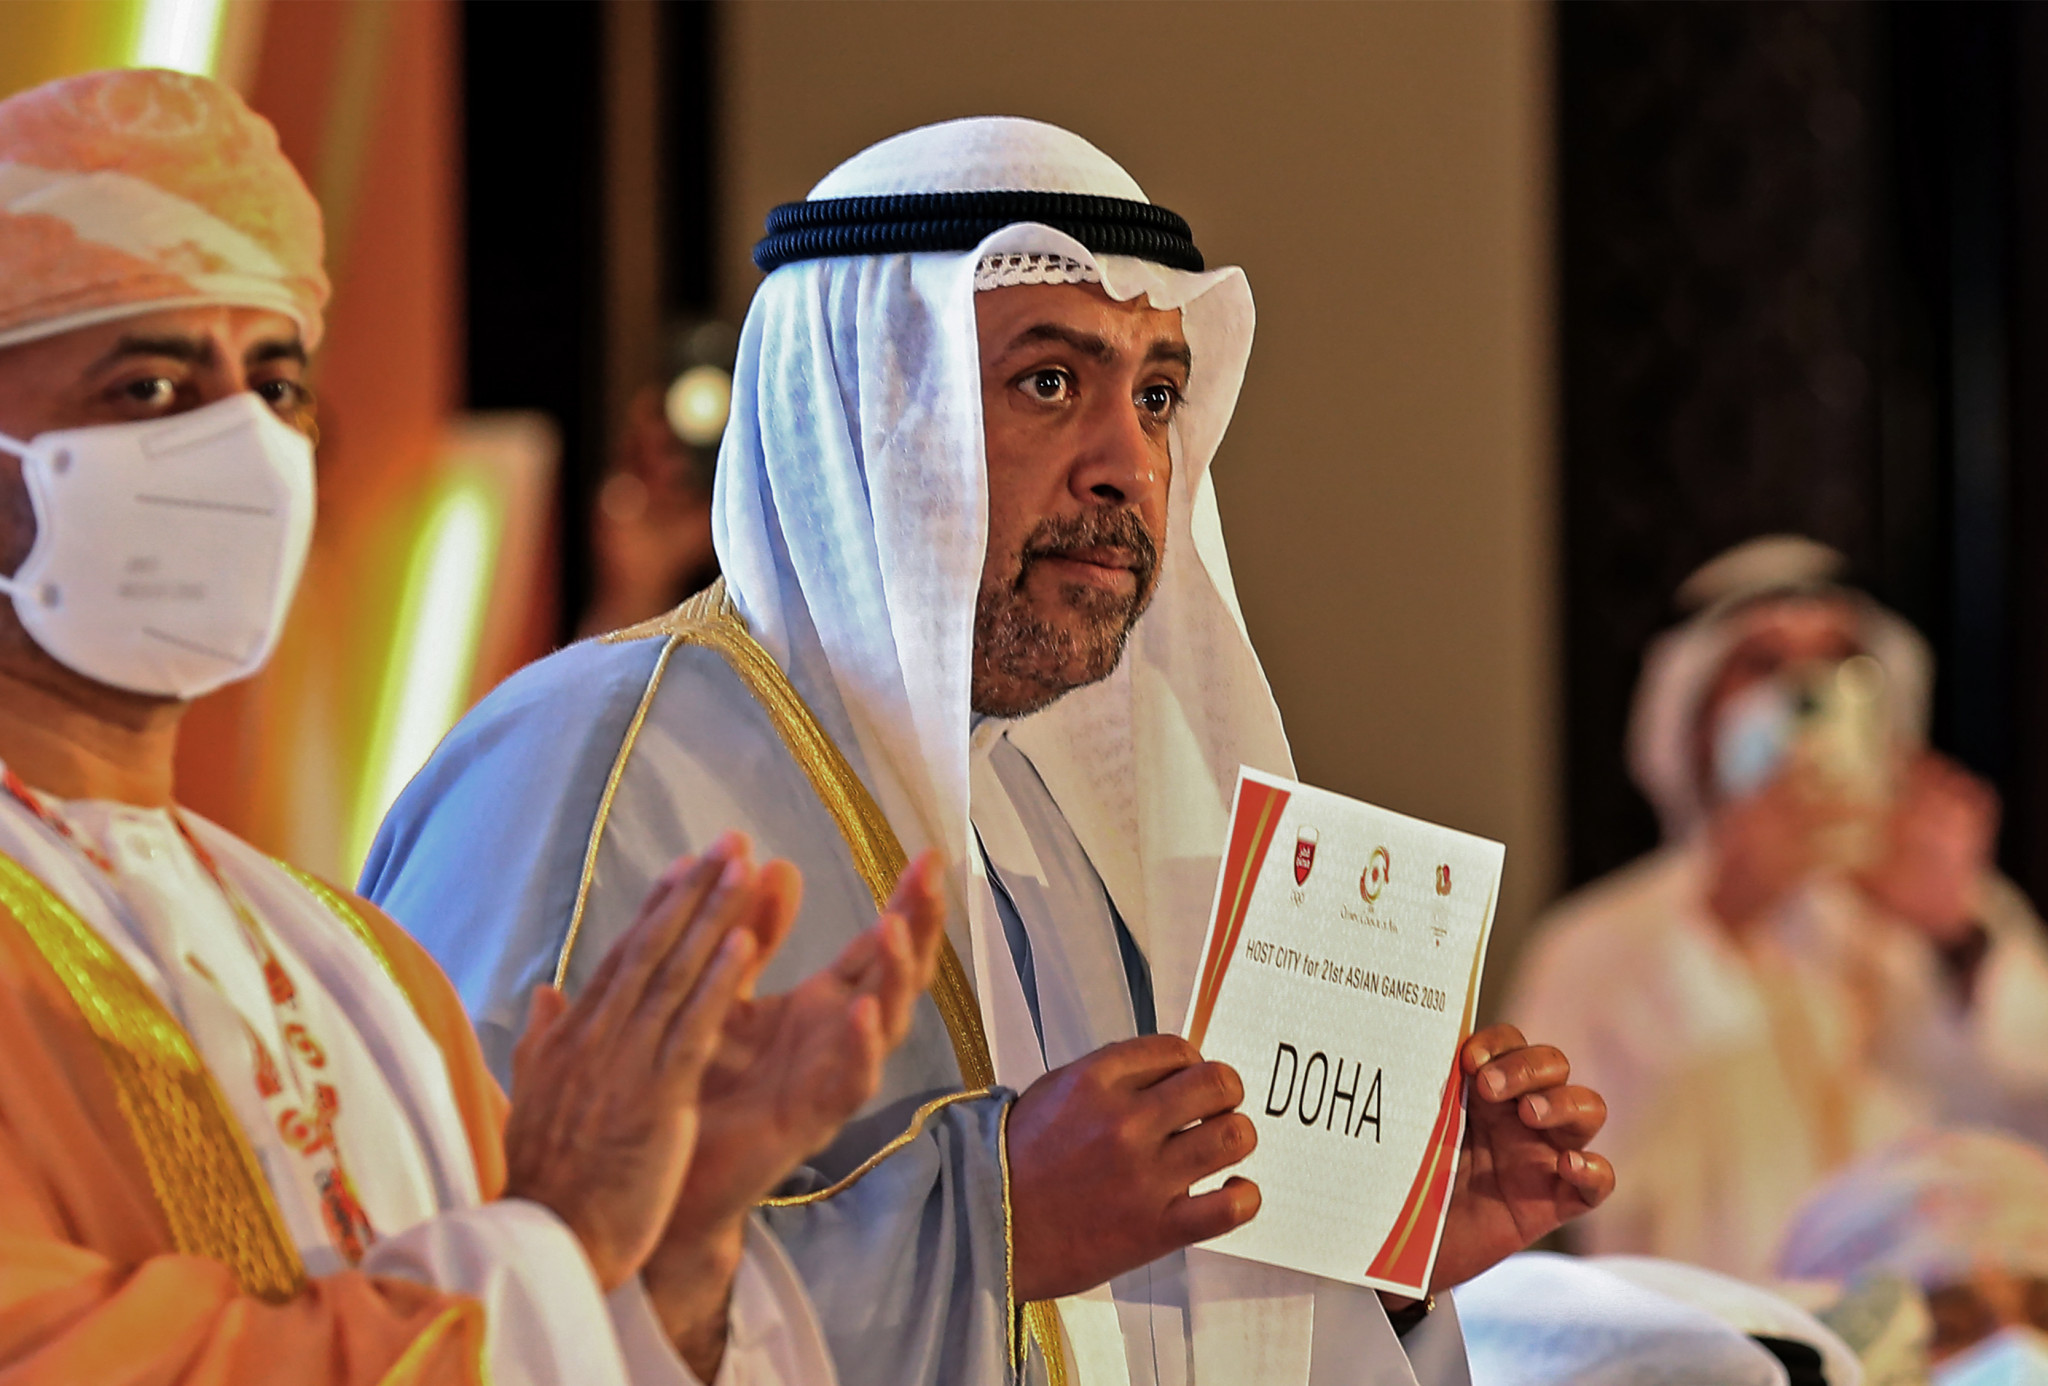 Doha to host 2030 Asian Games with Riyadh awarded 2034 edition